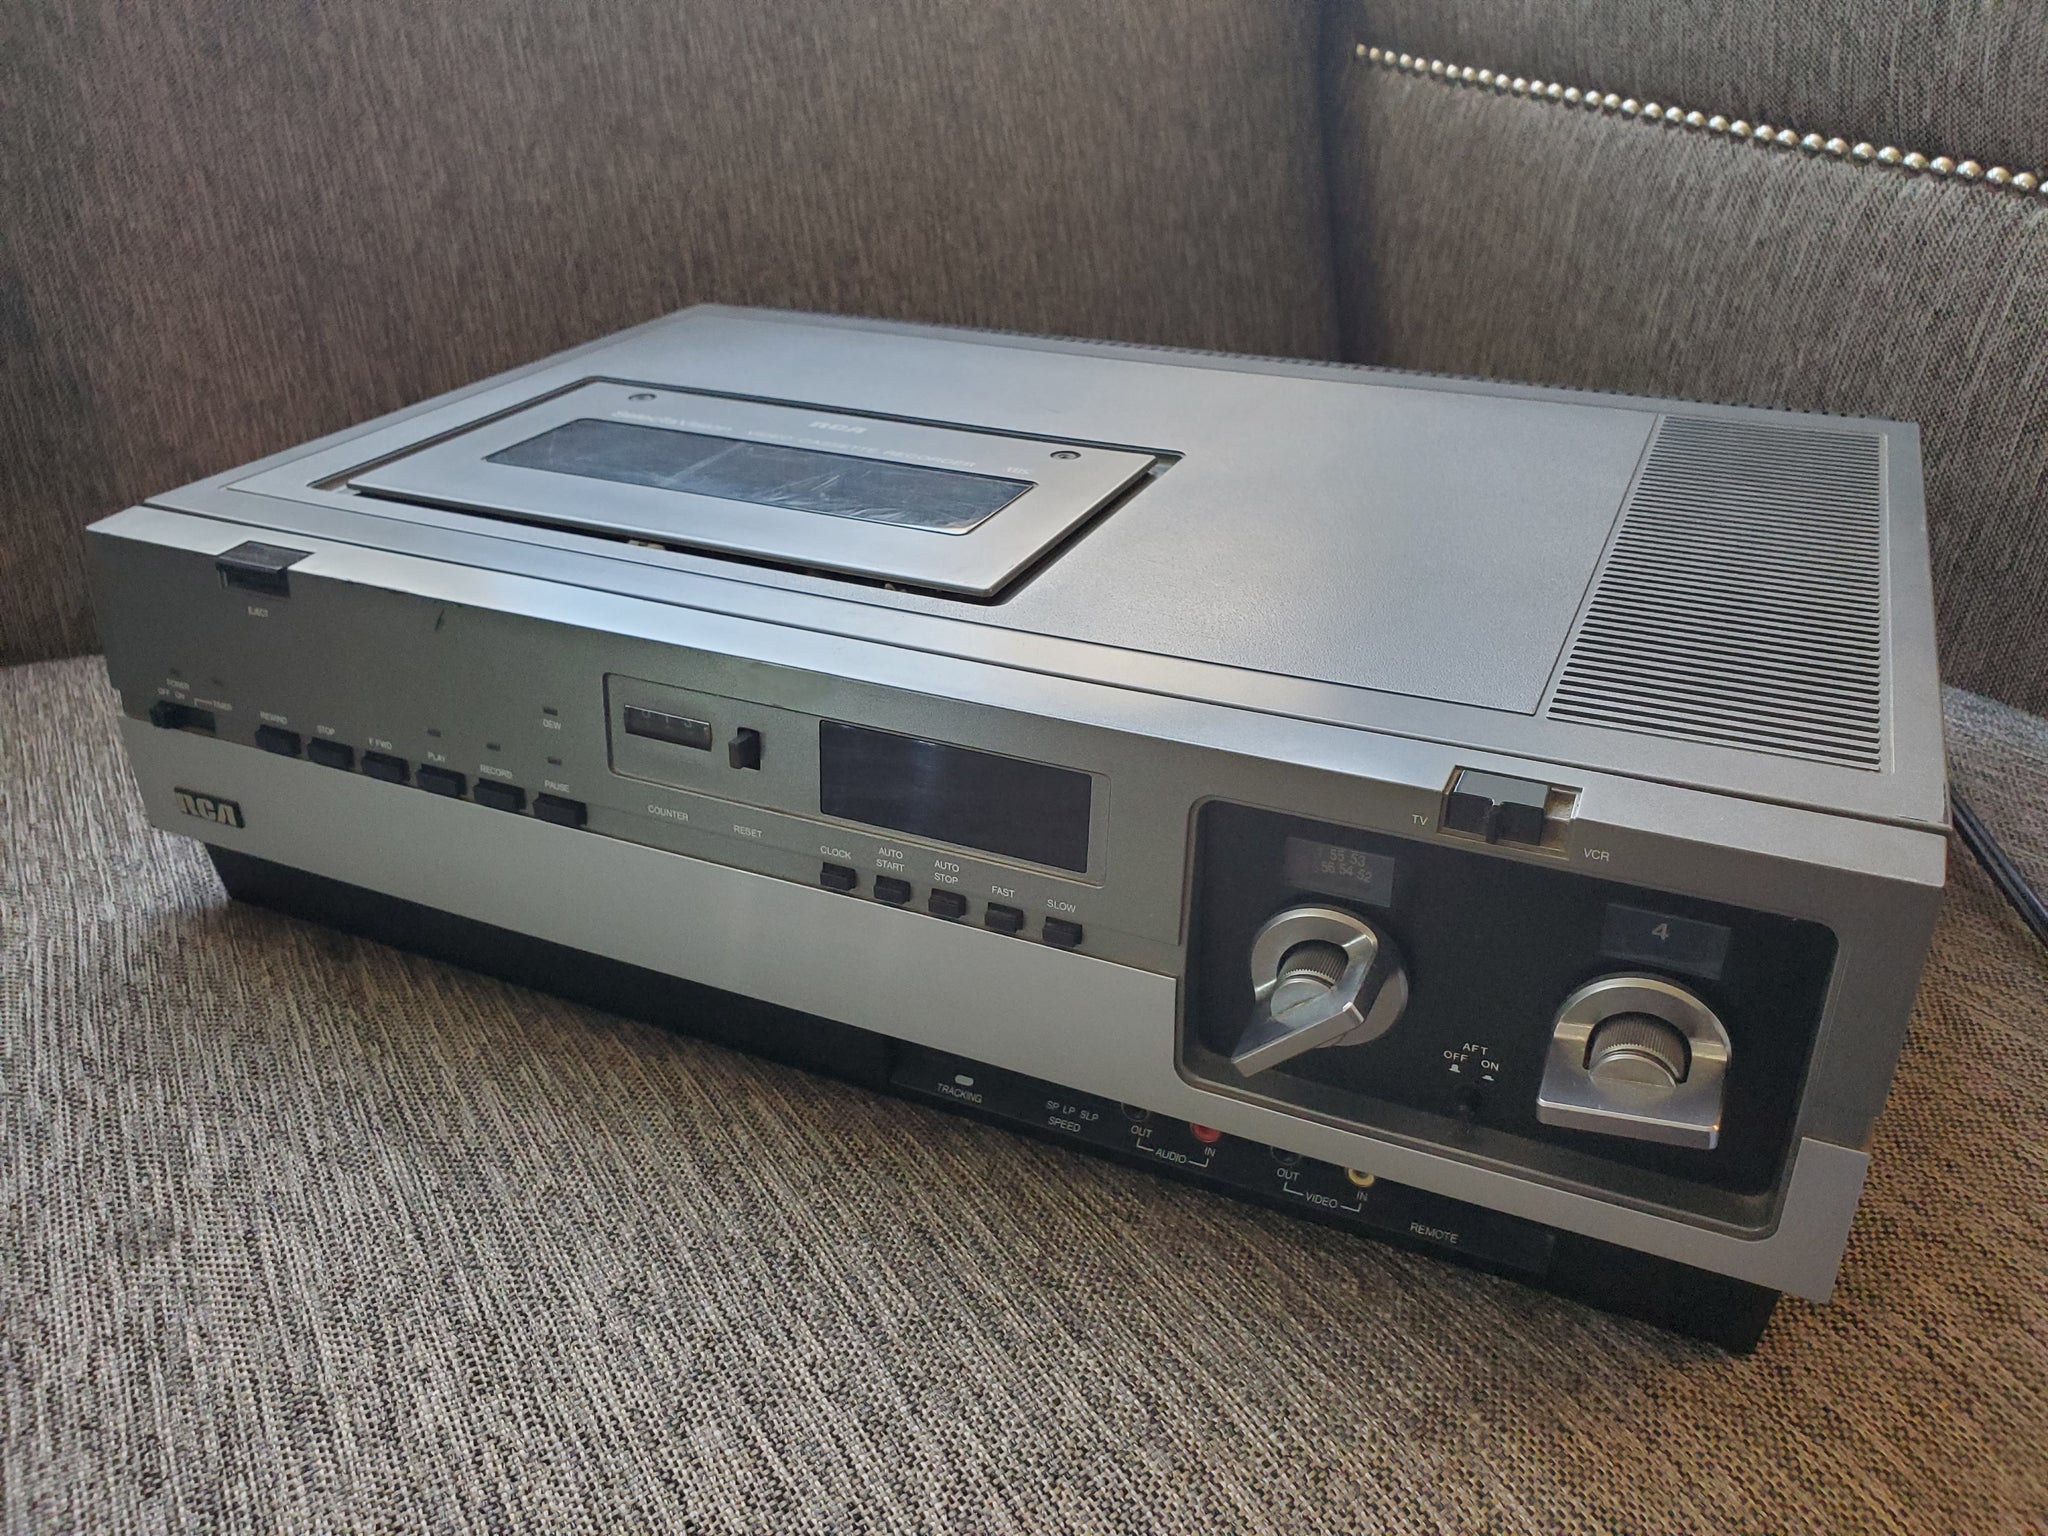 RCA VBT-200 Video Cassette Recorder Top Load VCR VHS Player with Dust Cover